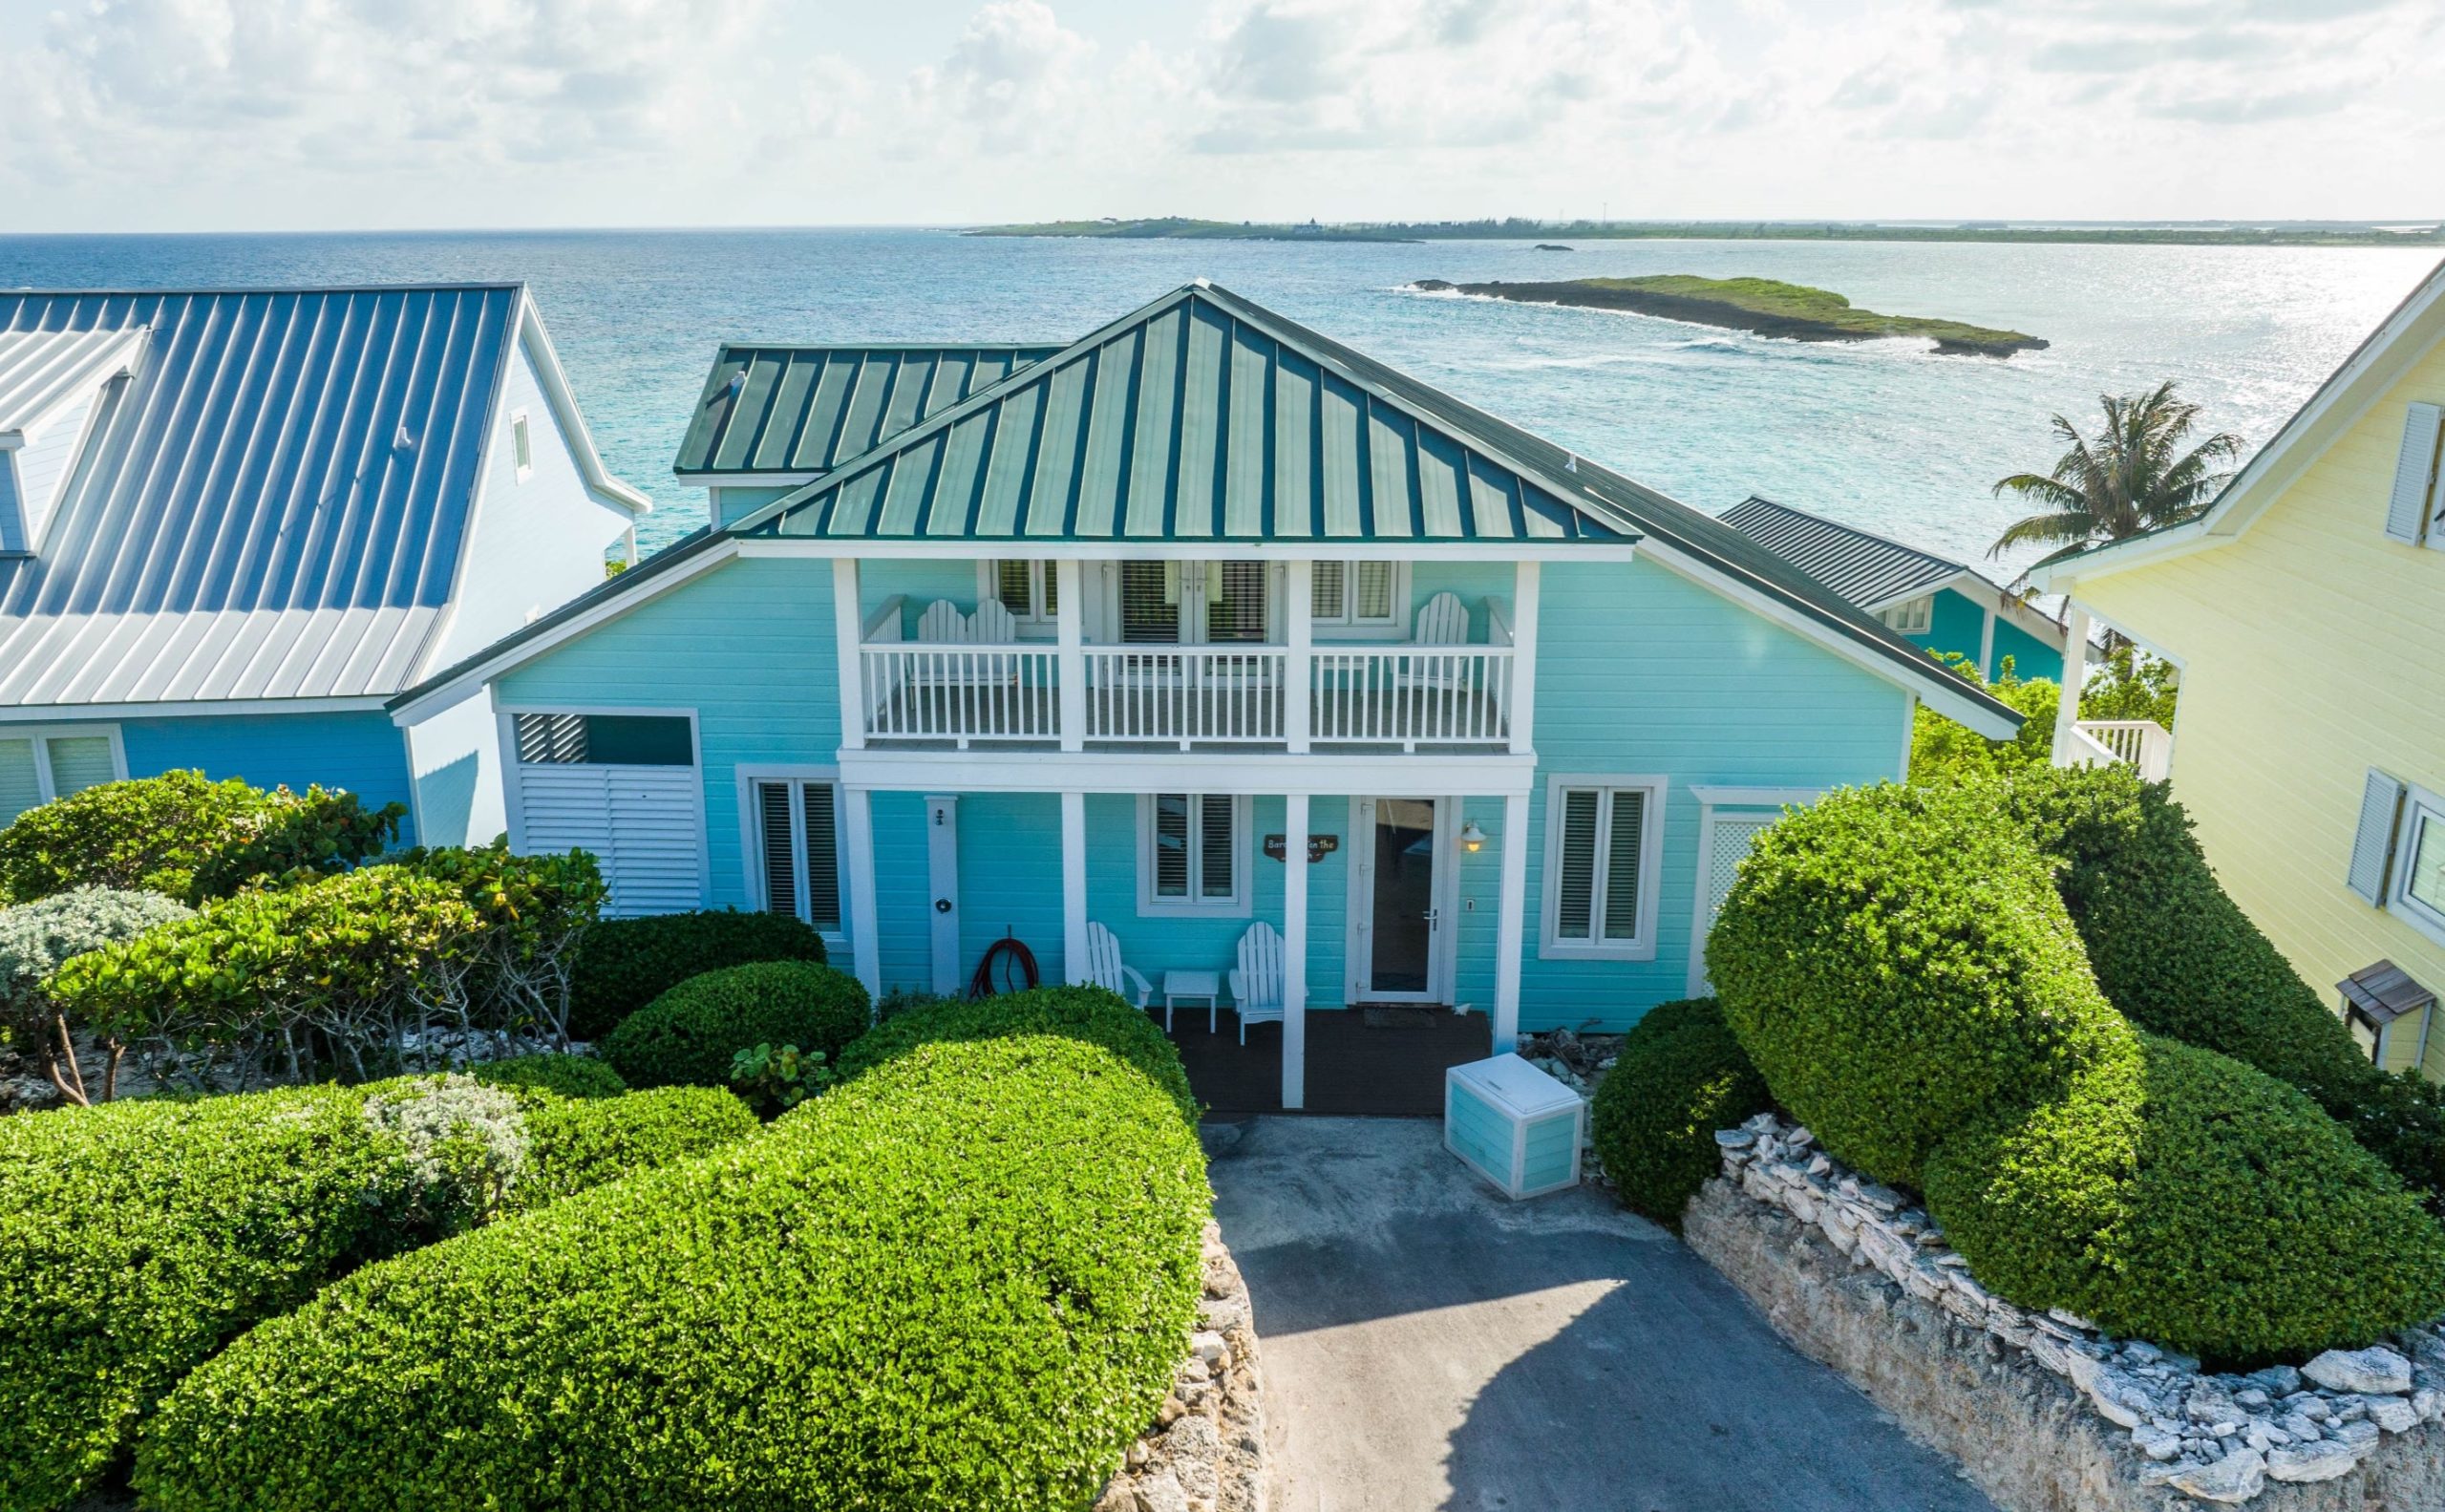 Villa with ocean view to The Bahamas at The Abaco Club